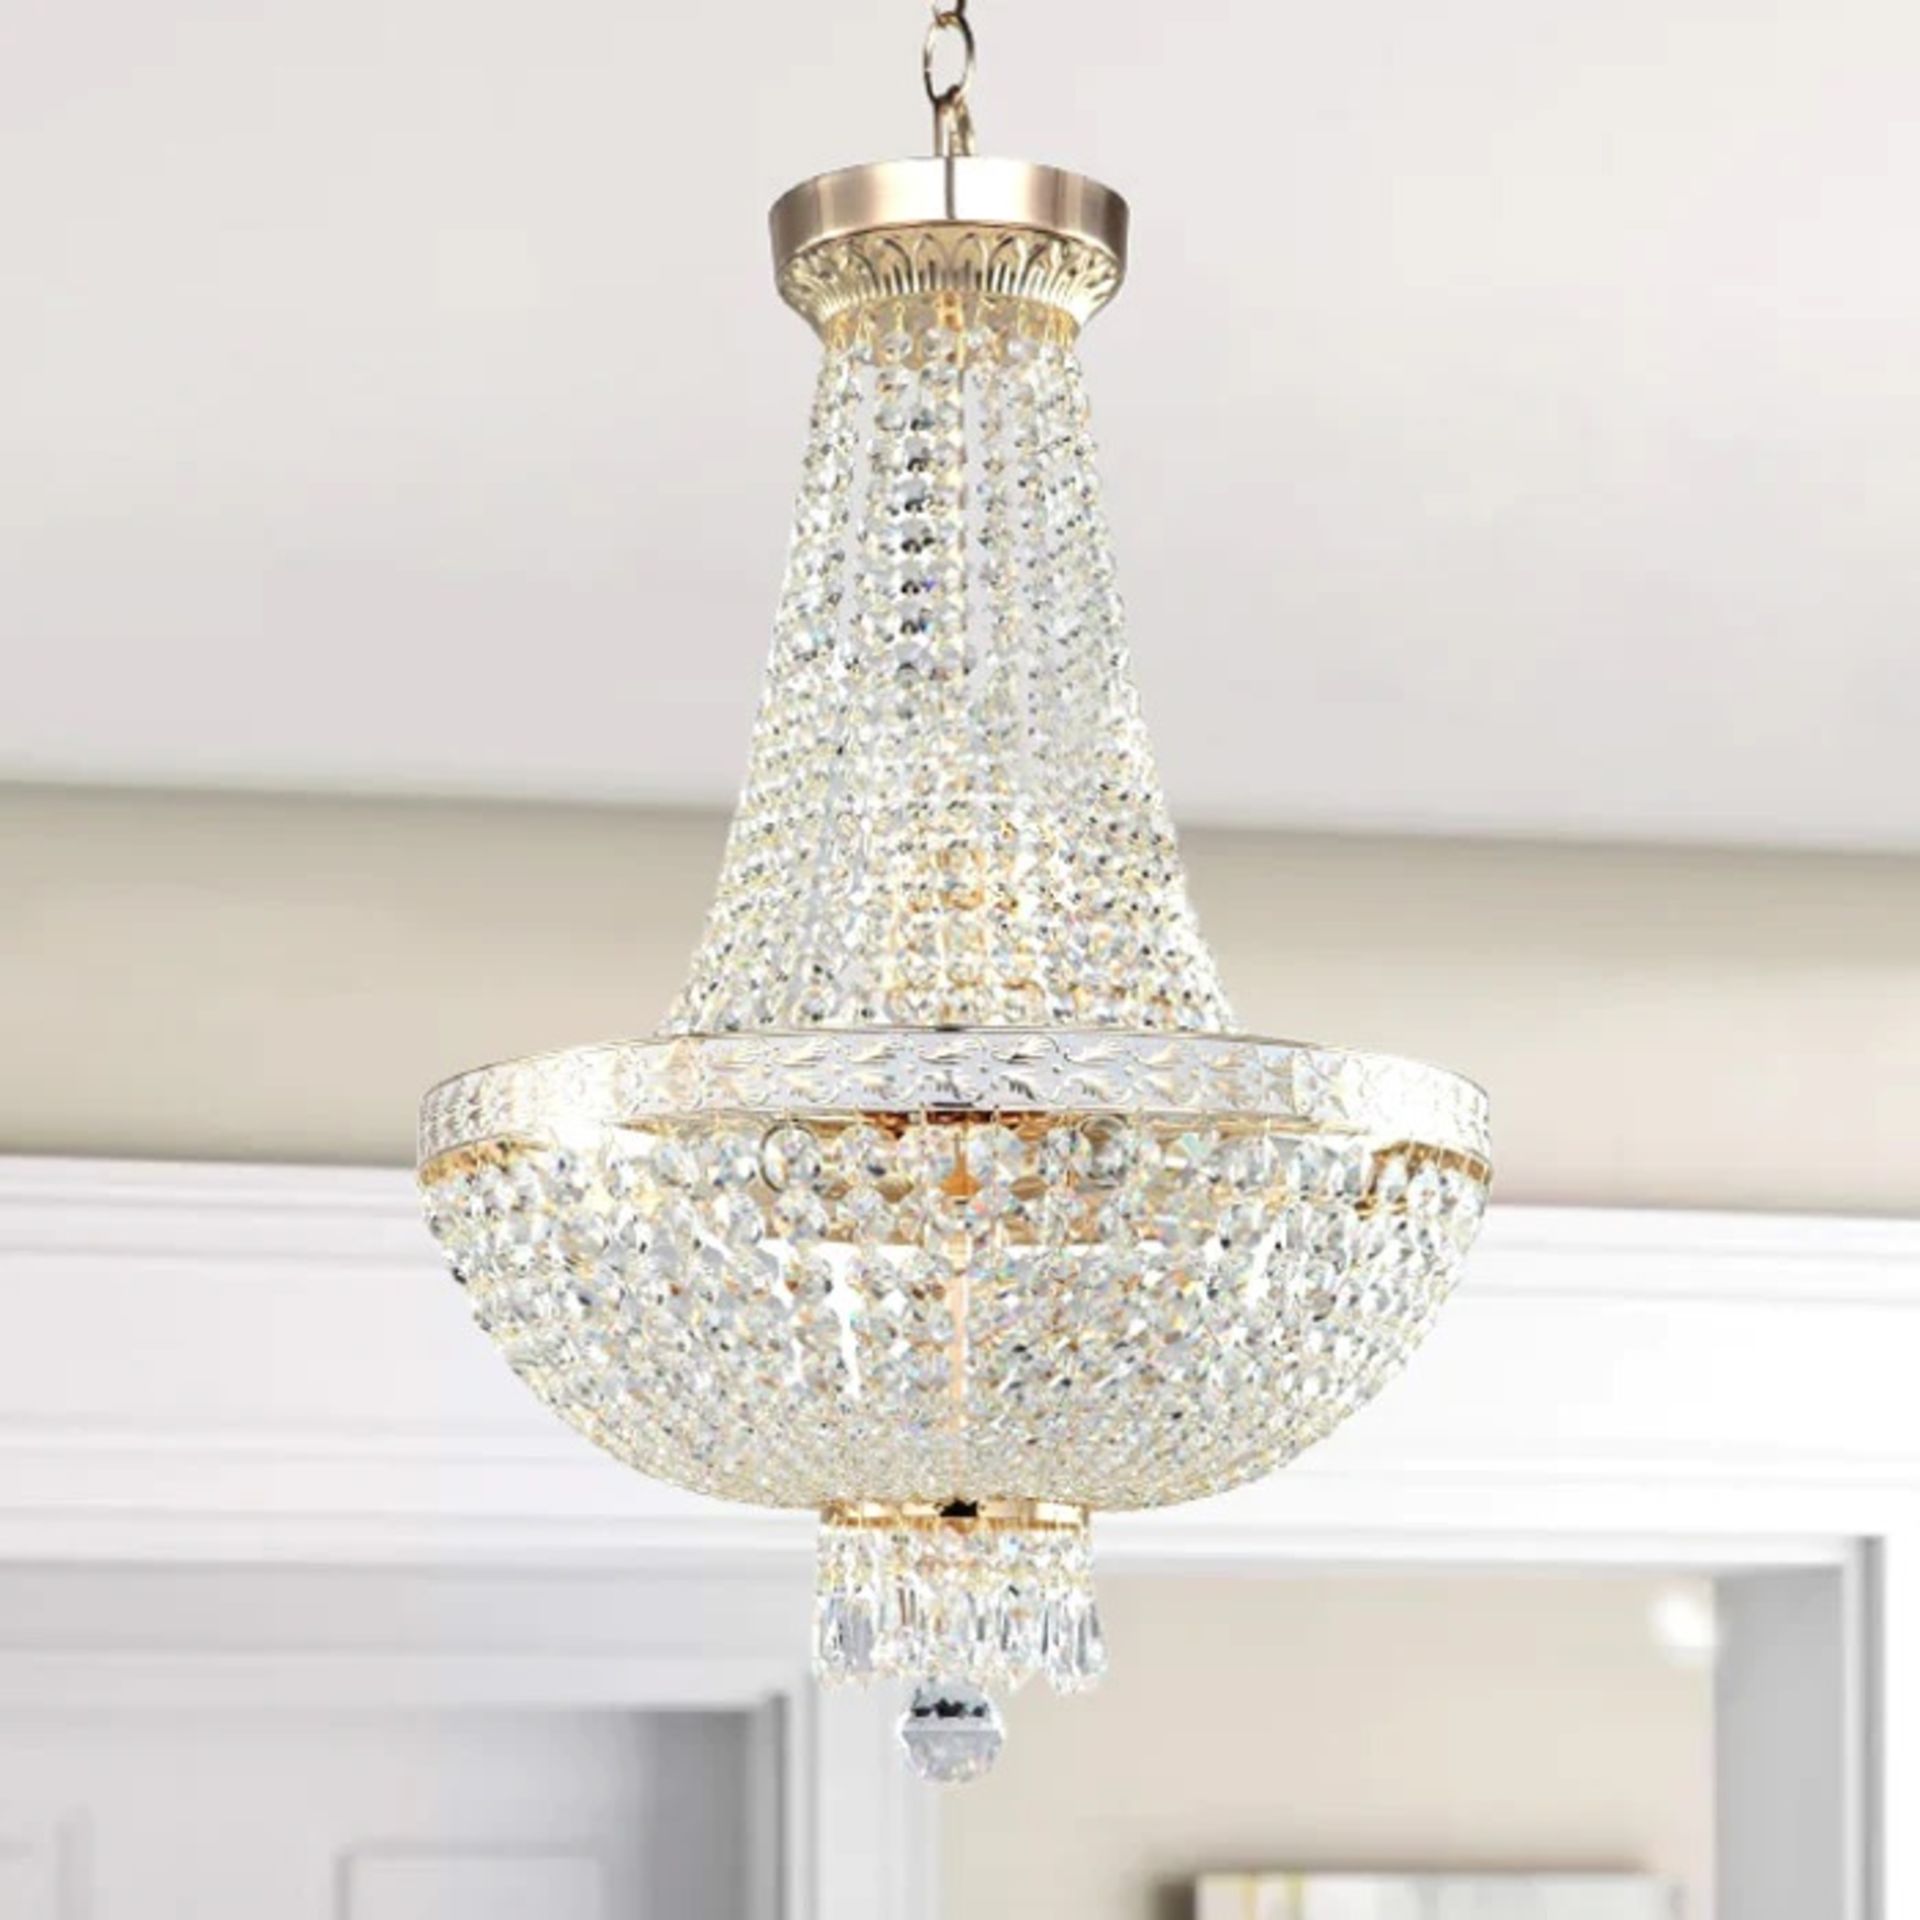 Empire Style Crystal Chandelier With A Height Maximum Of 170cm Featuring A Gold Plated Frame, - Image 2 of 2